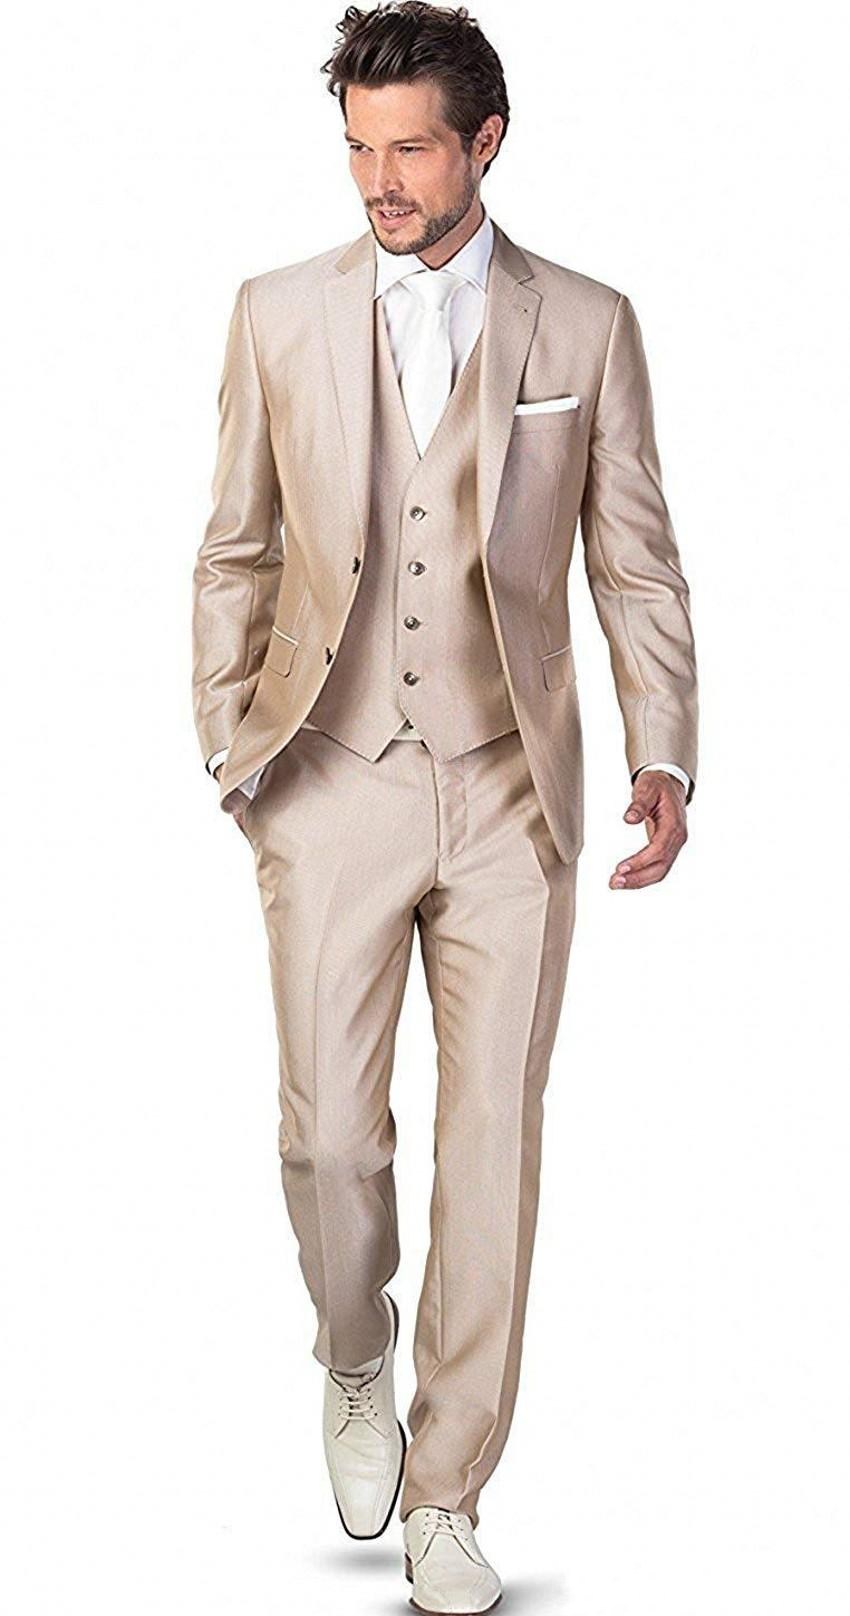 

Fashion Two Buttons Champagne Wedding Men Suits Notch Lapel Three Pieces Business Groom Tuxedos (Jacket+Pants+Vest+Tie) W1022, Same as image